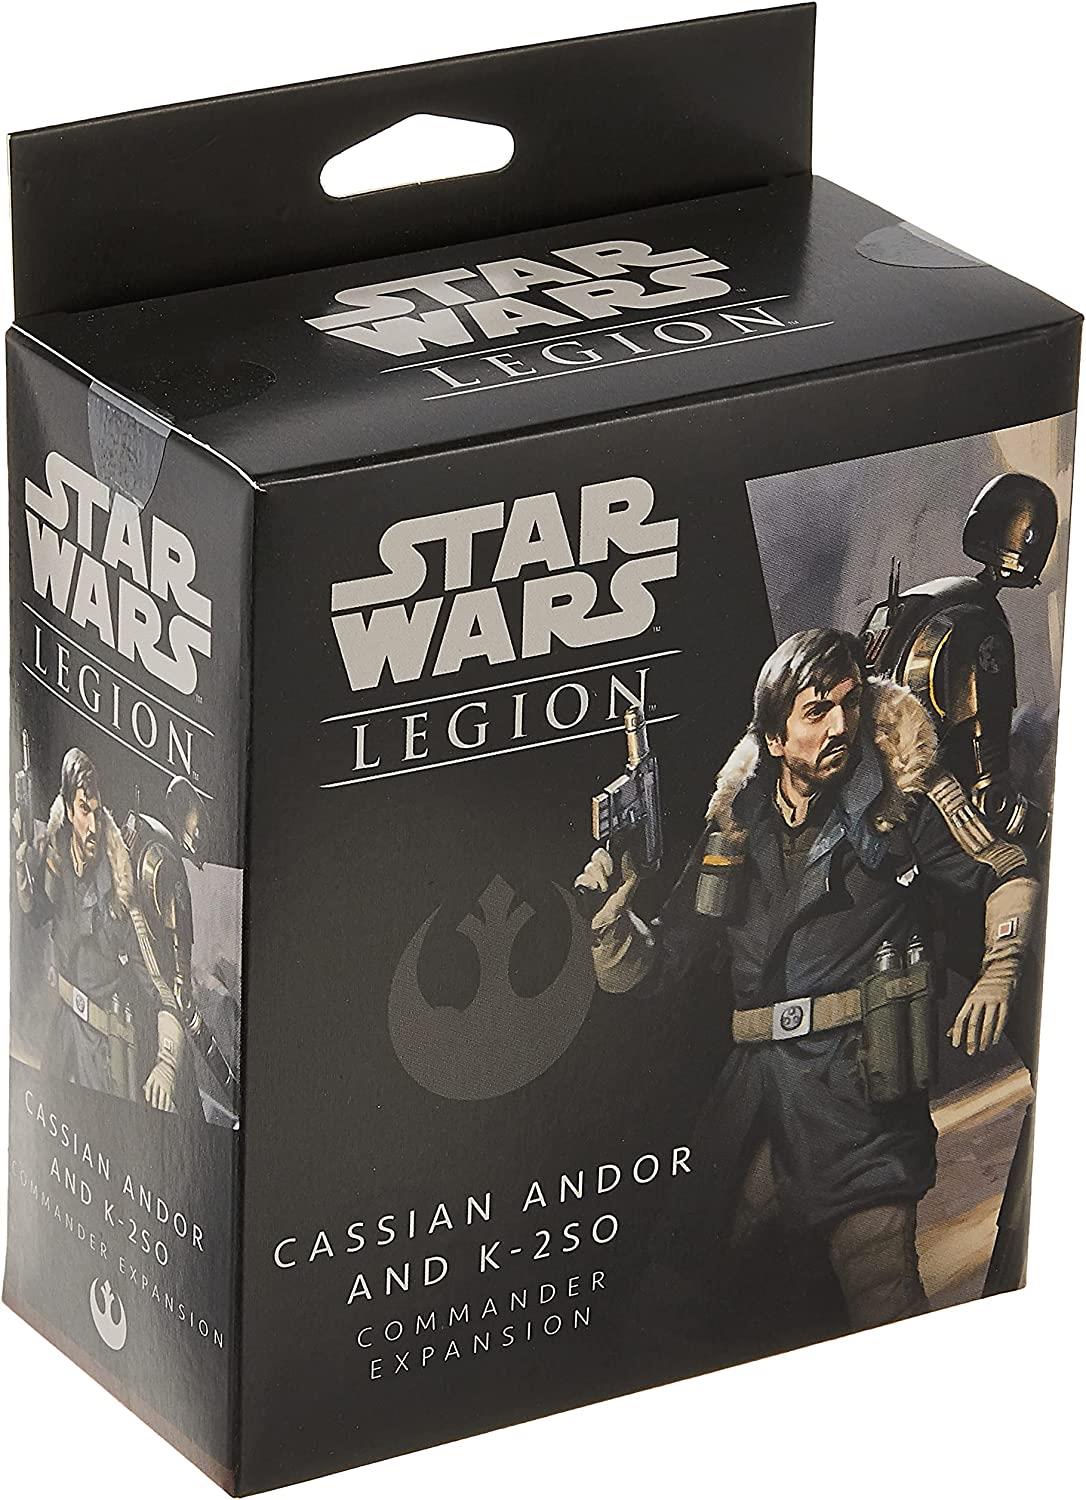 Star Wars: Legion - Cassian Andor and K-2SO by Atomic Mass Games